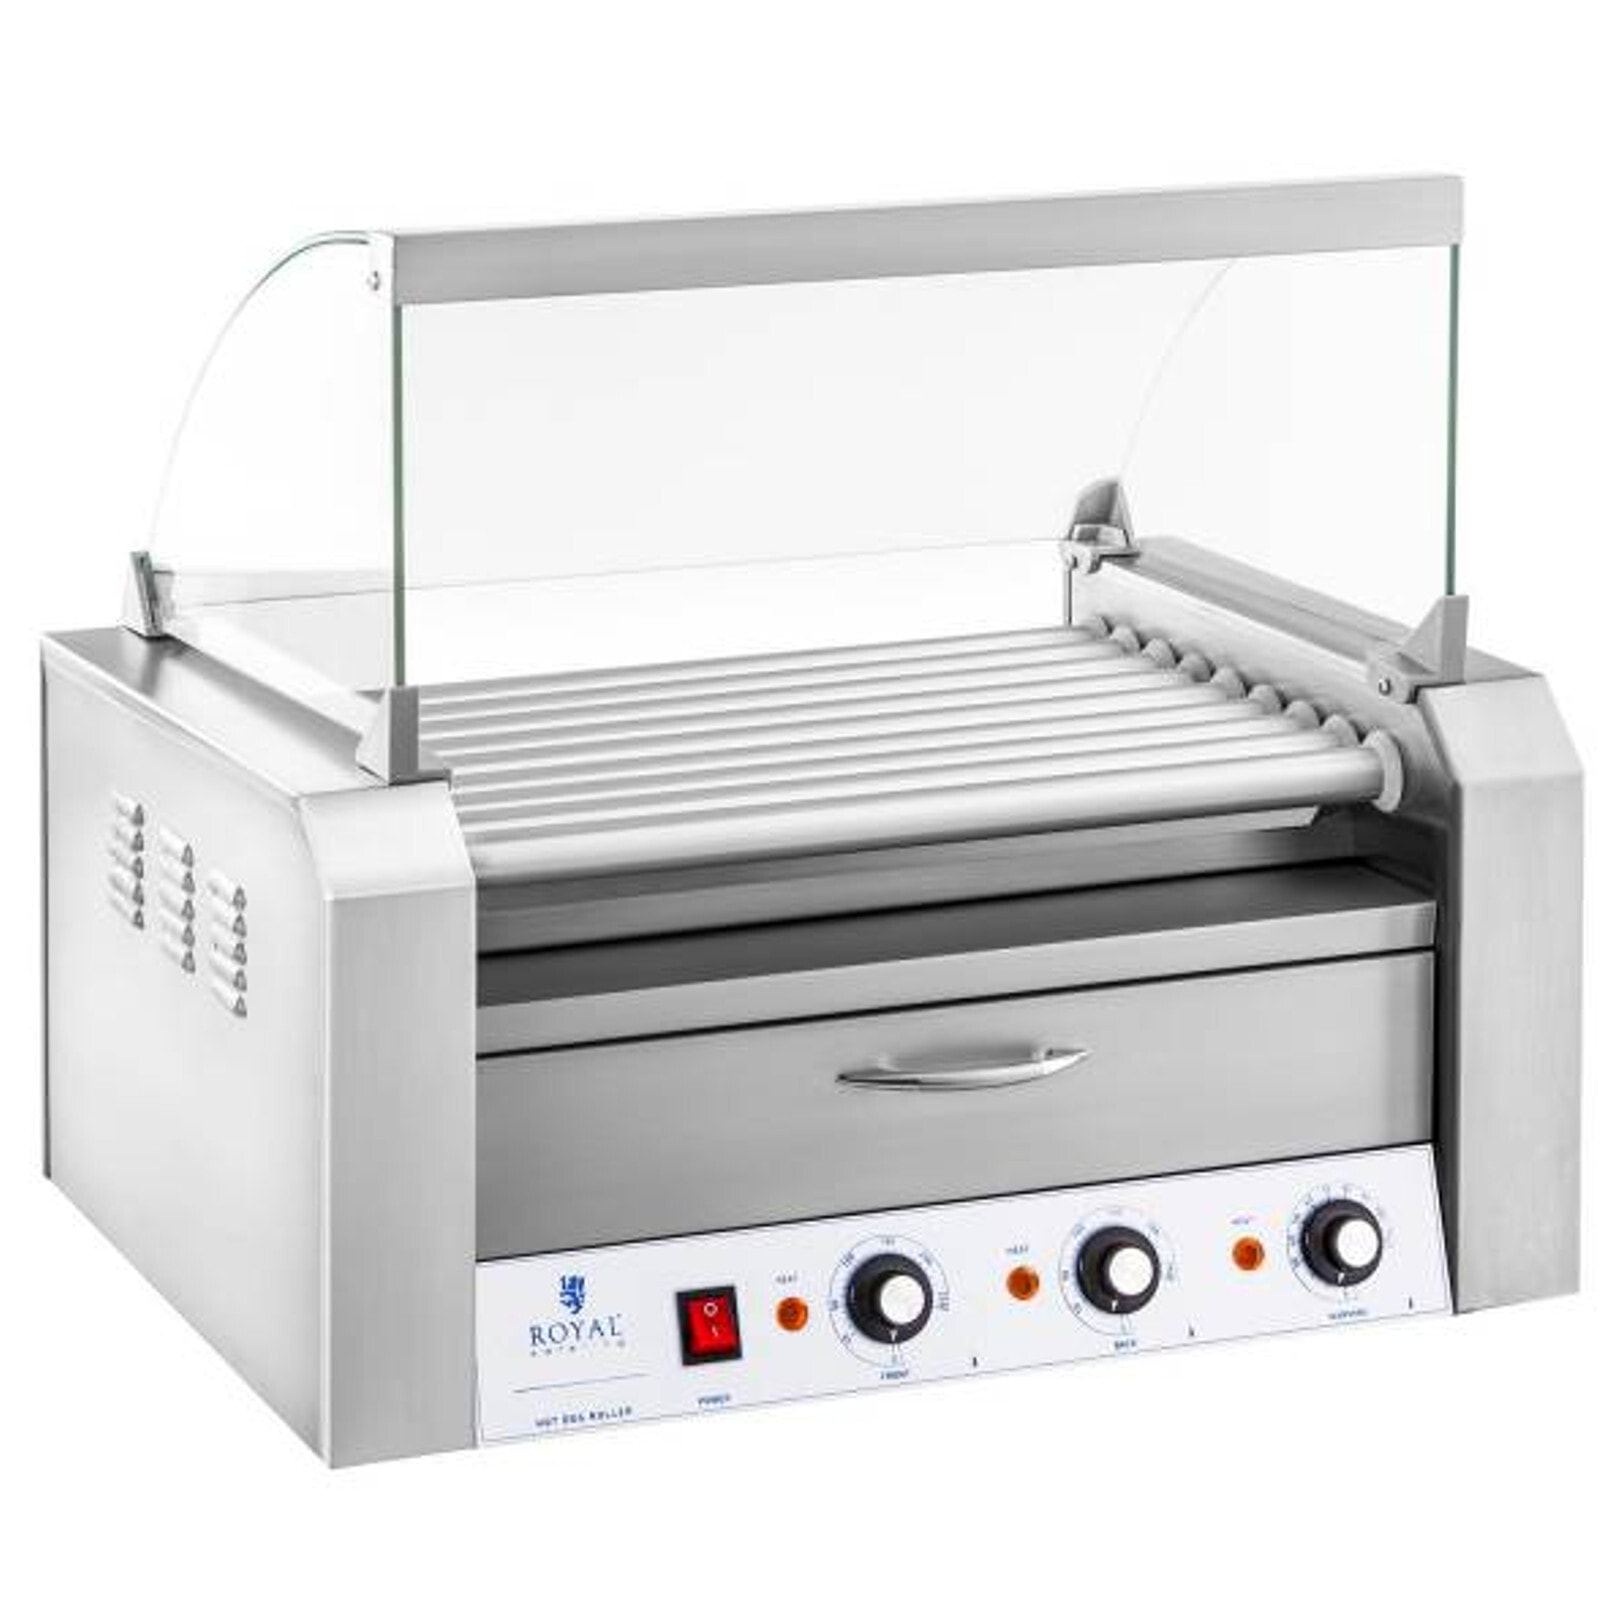 Roller grill roll with cover and a heating drawer for rolls 16 hotdogs 2200W 230V Royal Catering